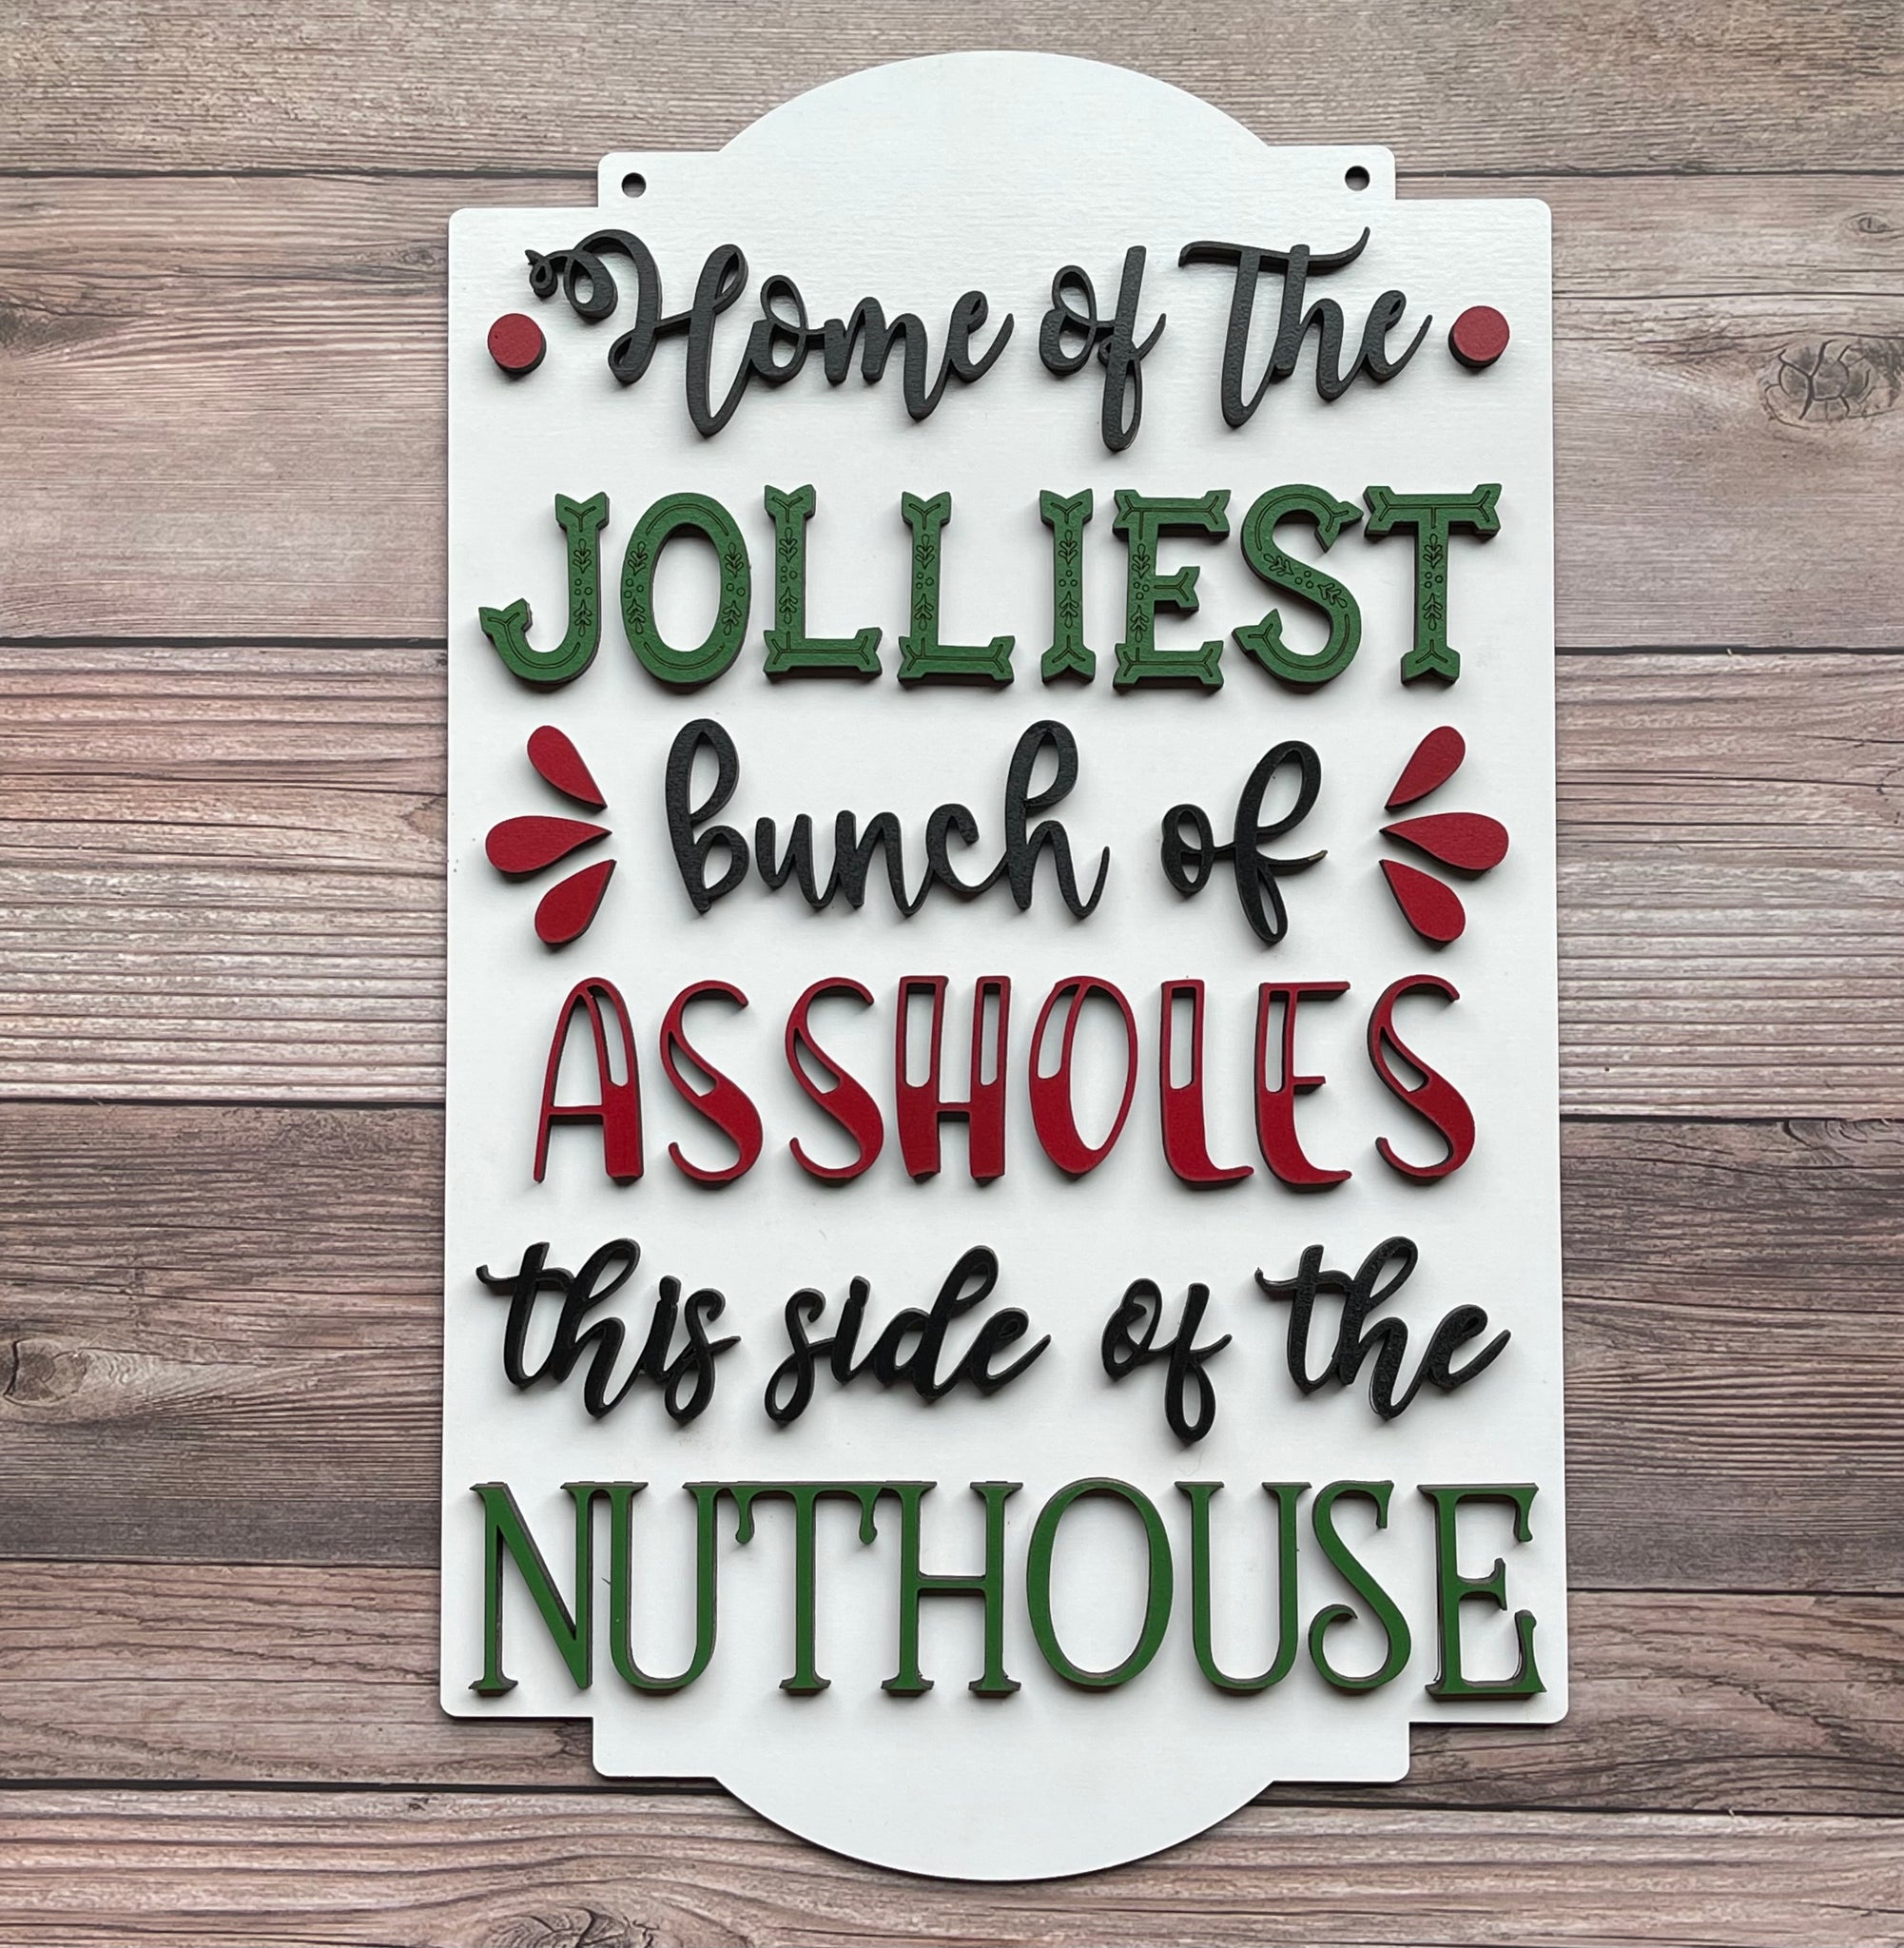 Home Of The Jolliest Bunch This Side Of The Nuthouse Wall Sign